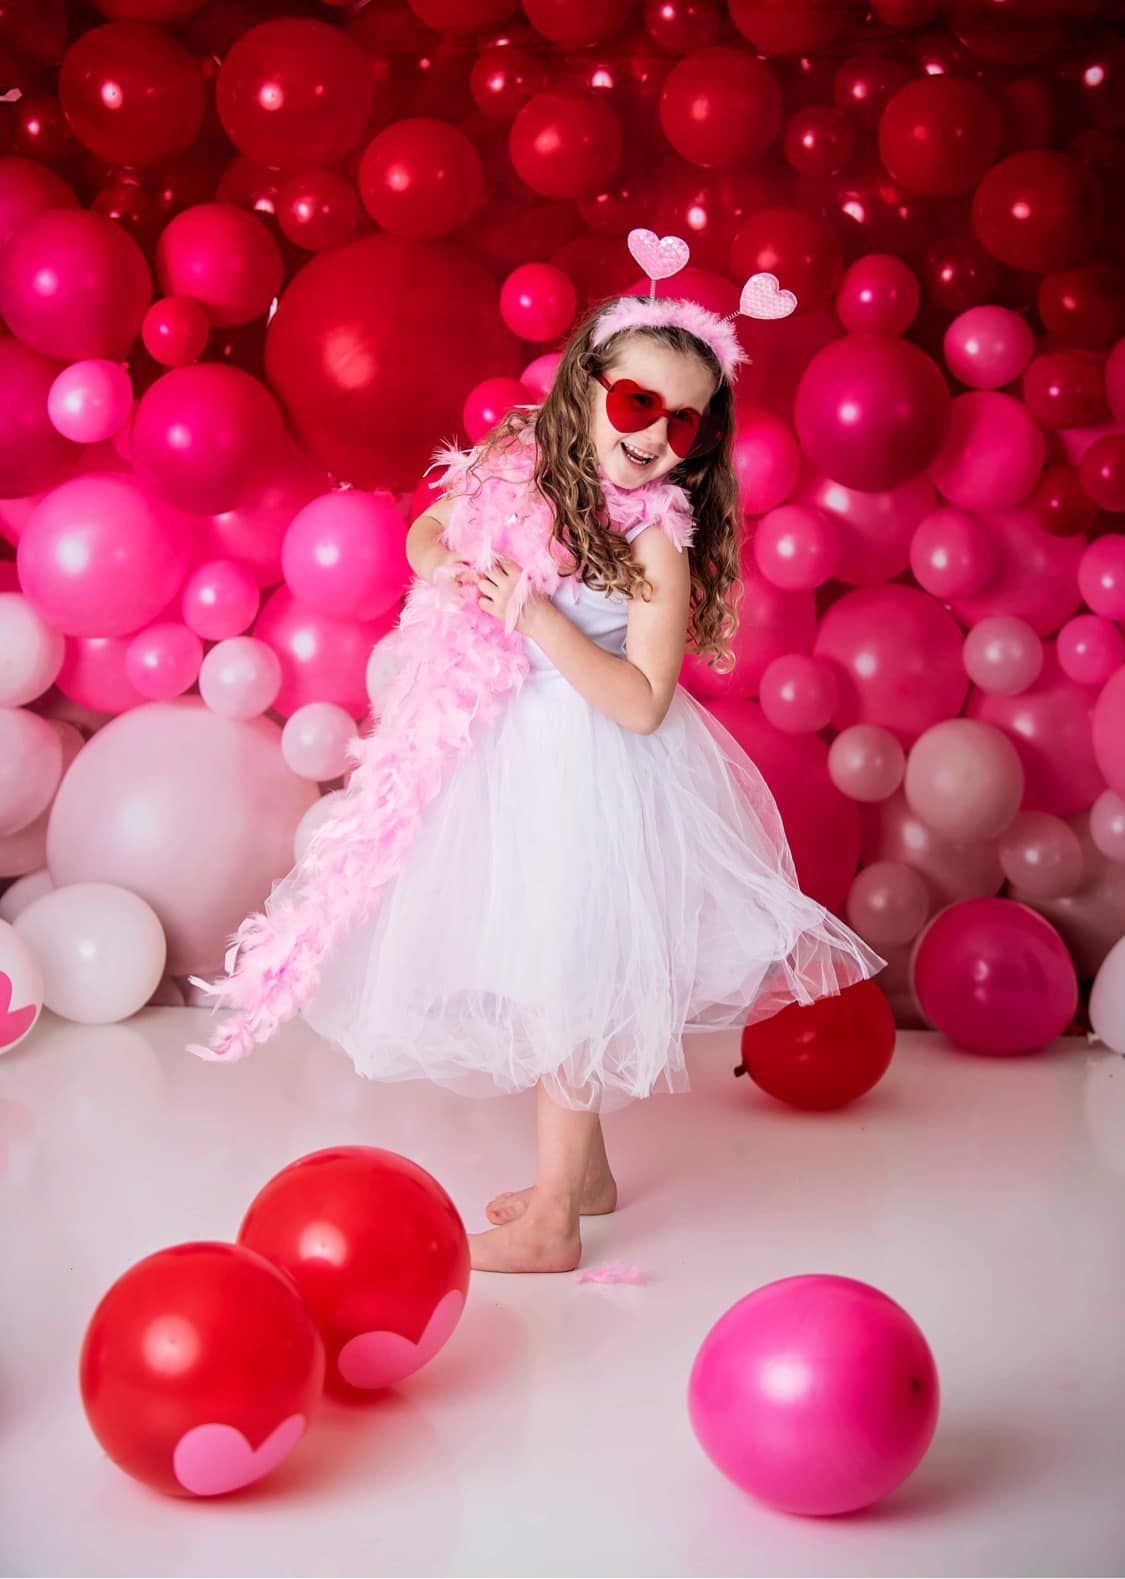 Kate Red Balloon Wall Valentine's Day Birthday Cake Smash Party Backdrop for Photography Designed by Mandy Ringe Photography - Kate Backdrop